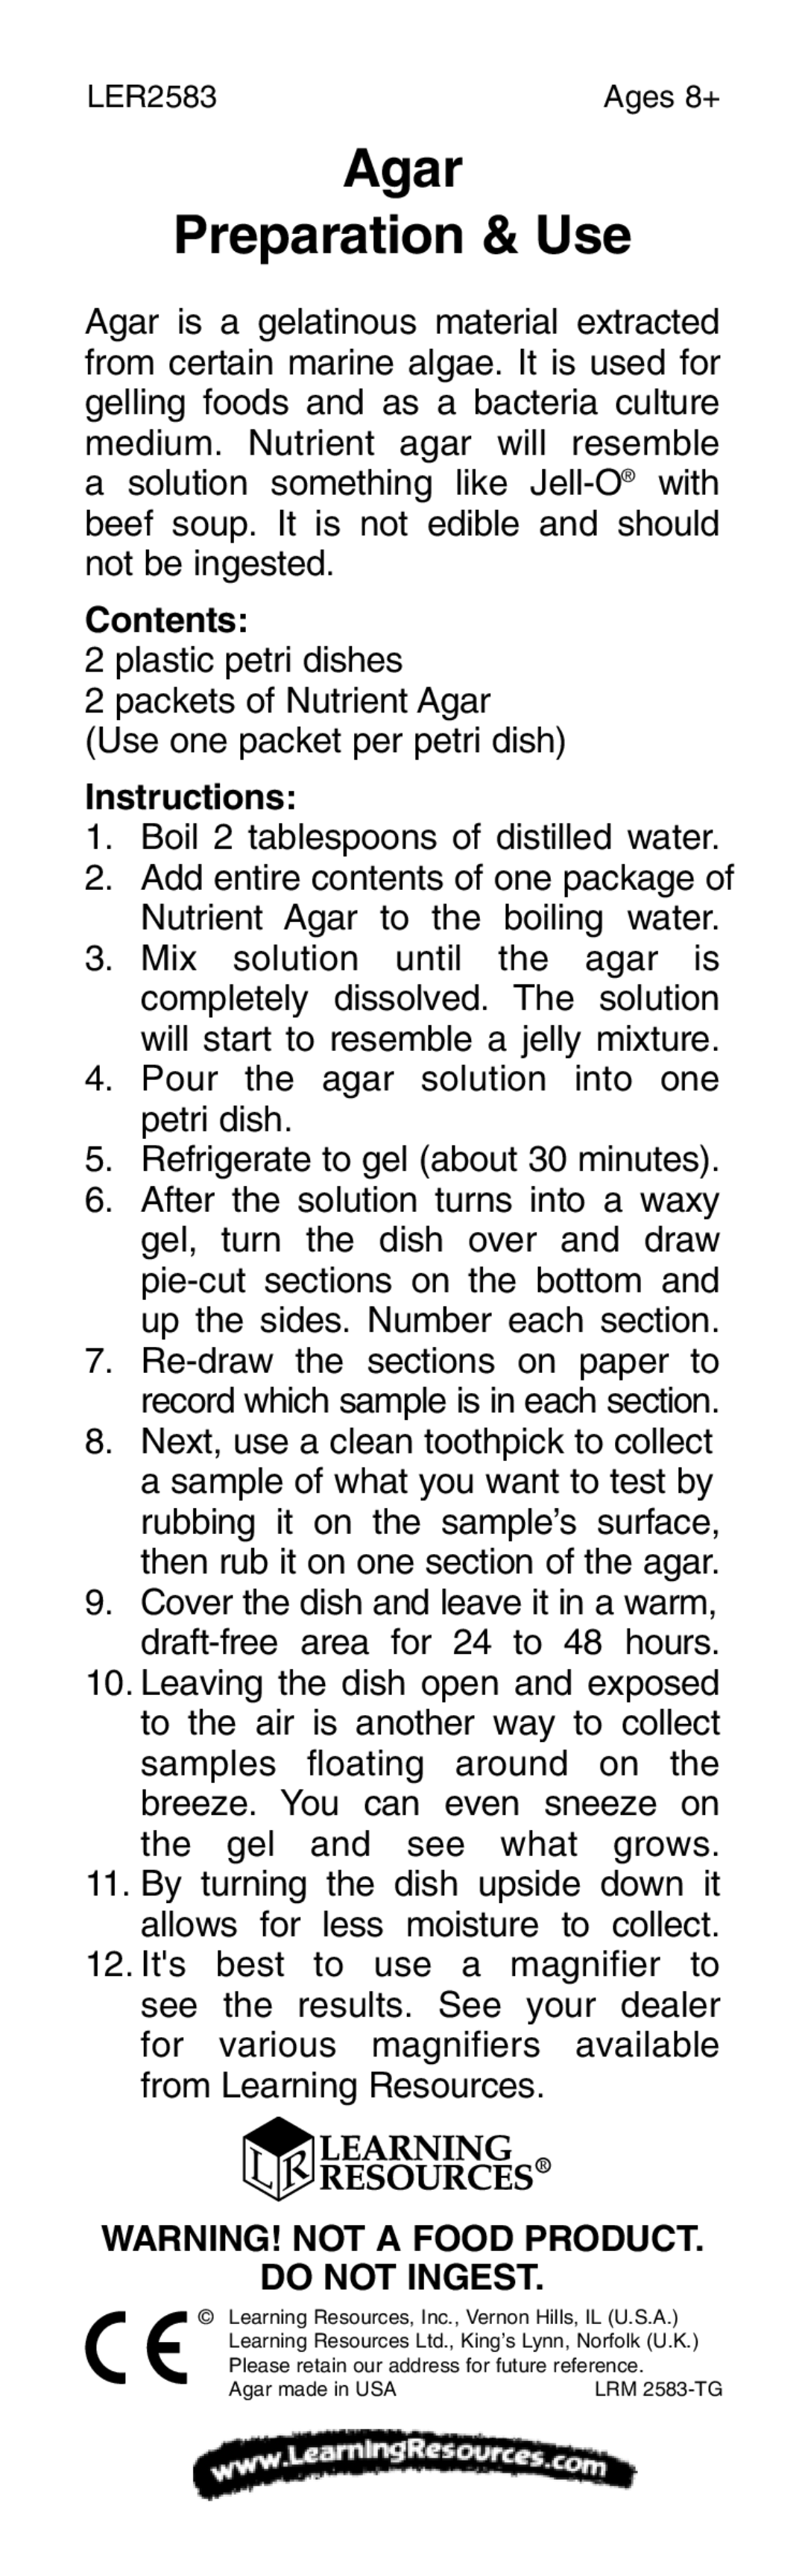 Learning Resources LER2583 manual Agar Preparation & Use, Contents, Instructions 